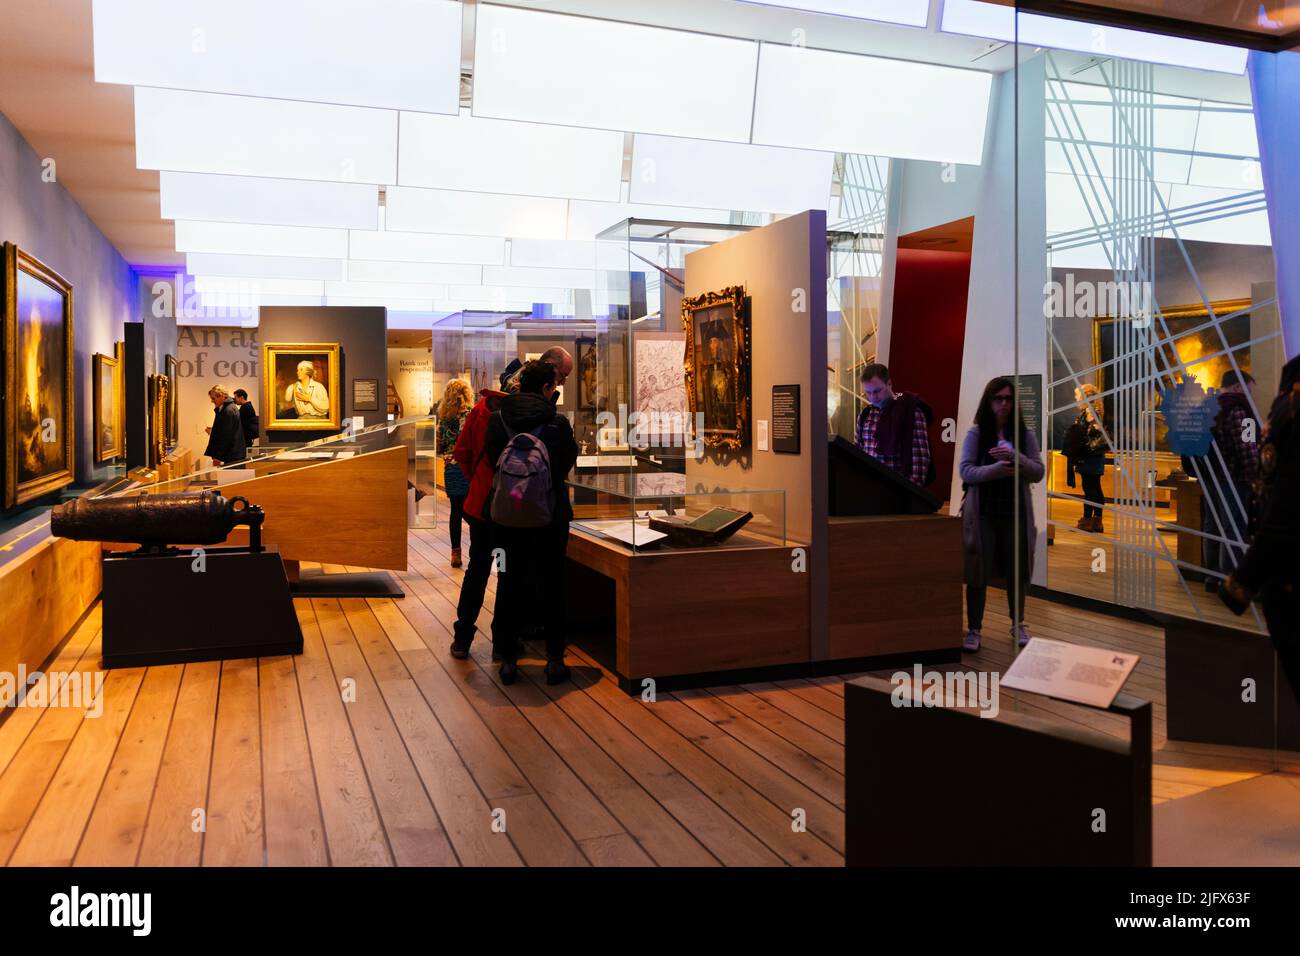 Exhibition room. The National Maritime Museum, NMM, is a maritime museum in Greenwich, London. It is part of Royal Museums Greenwich, a network of mus Stock Photo